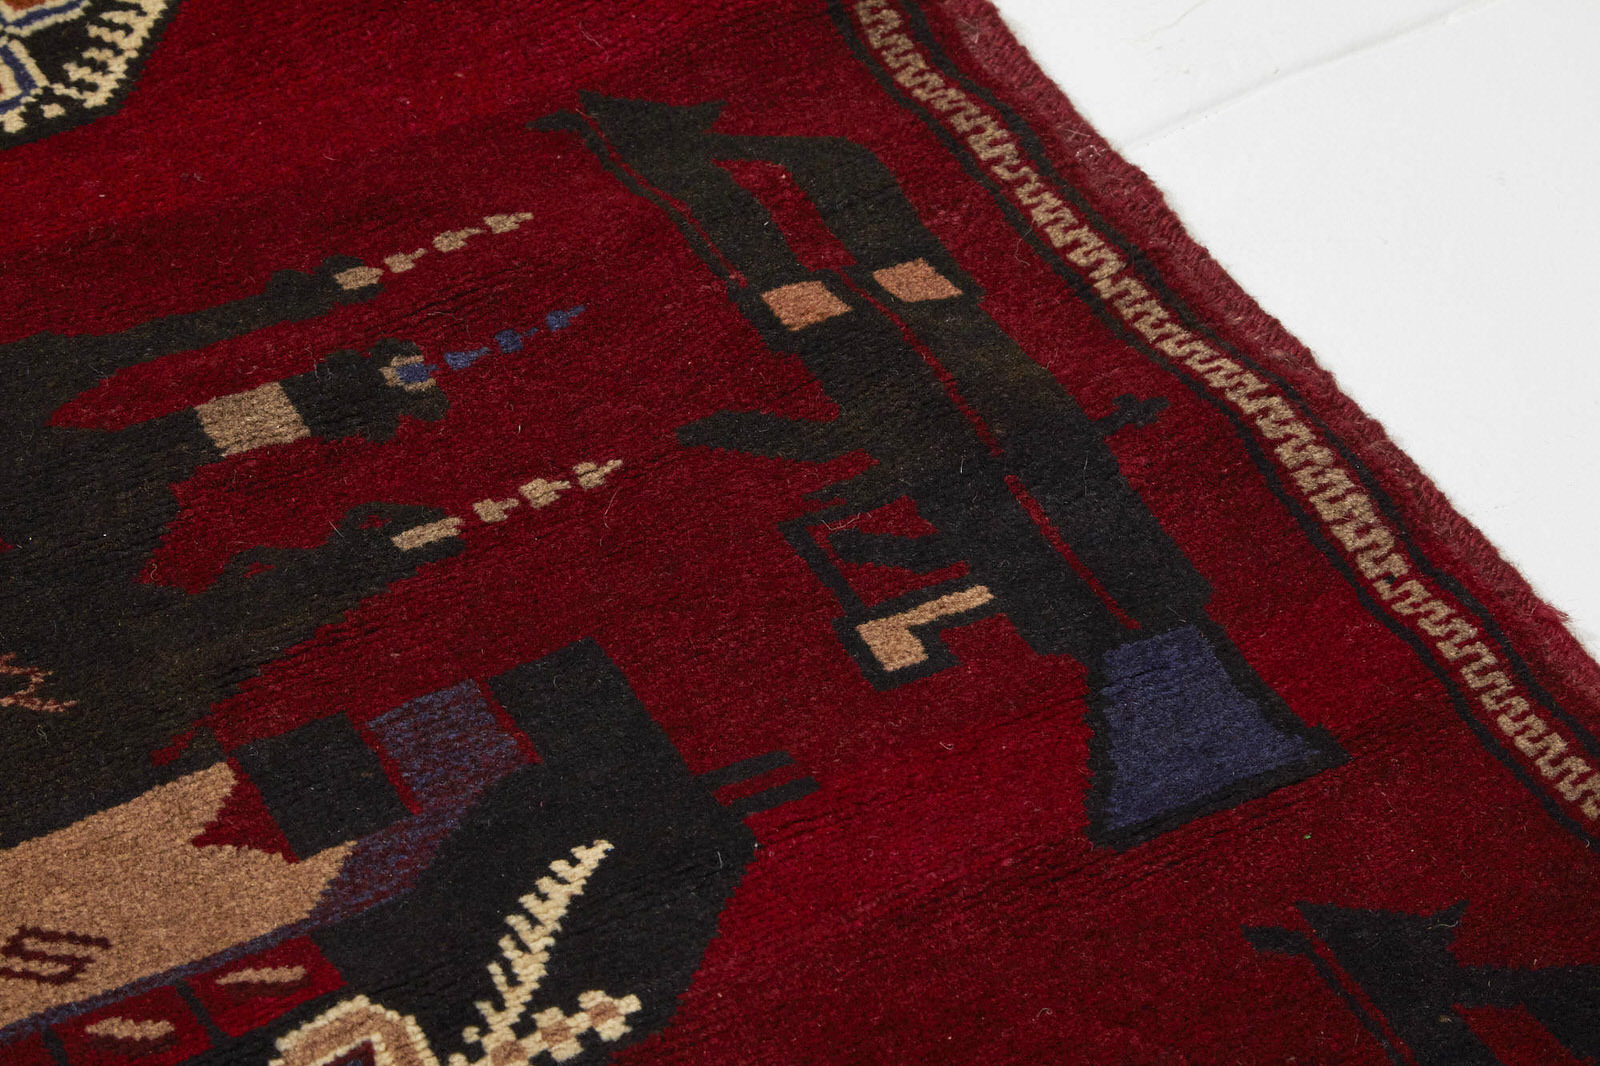 Red hand woven Afghan War Rug with red base and blue, brown, cream and tan tanks and weapons - Available from King Kennedy Rugs Los Angeles